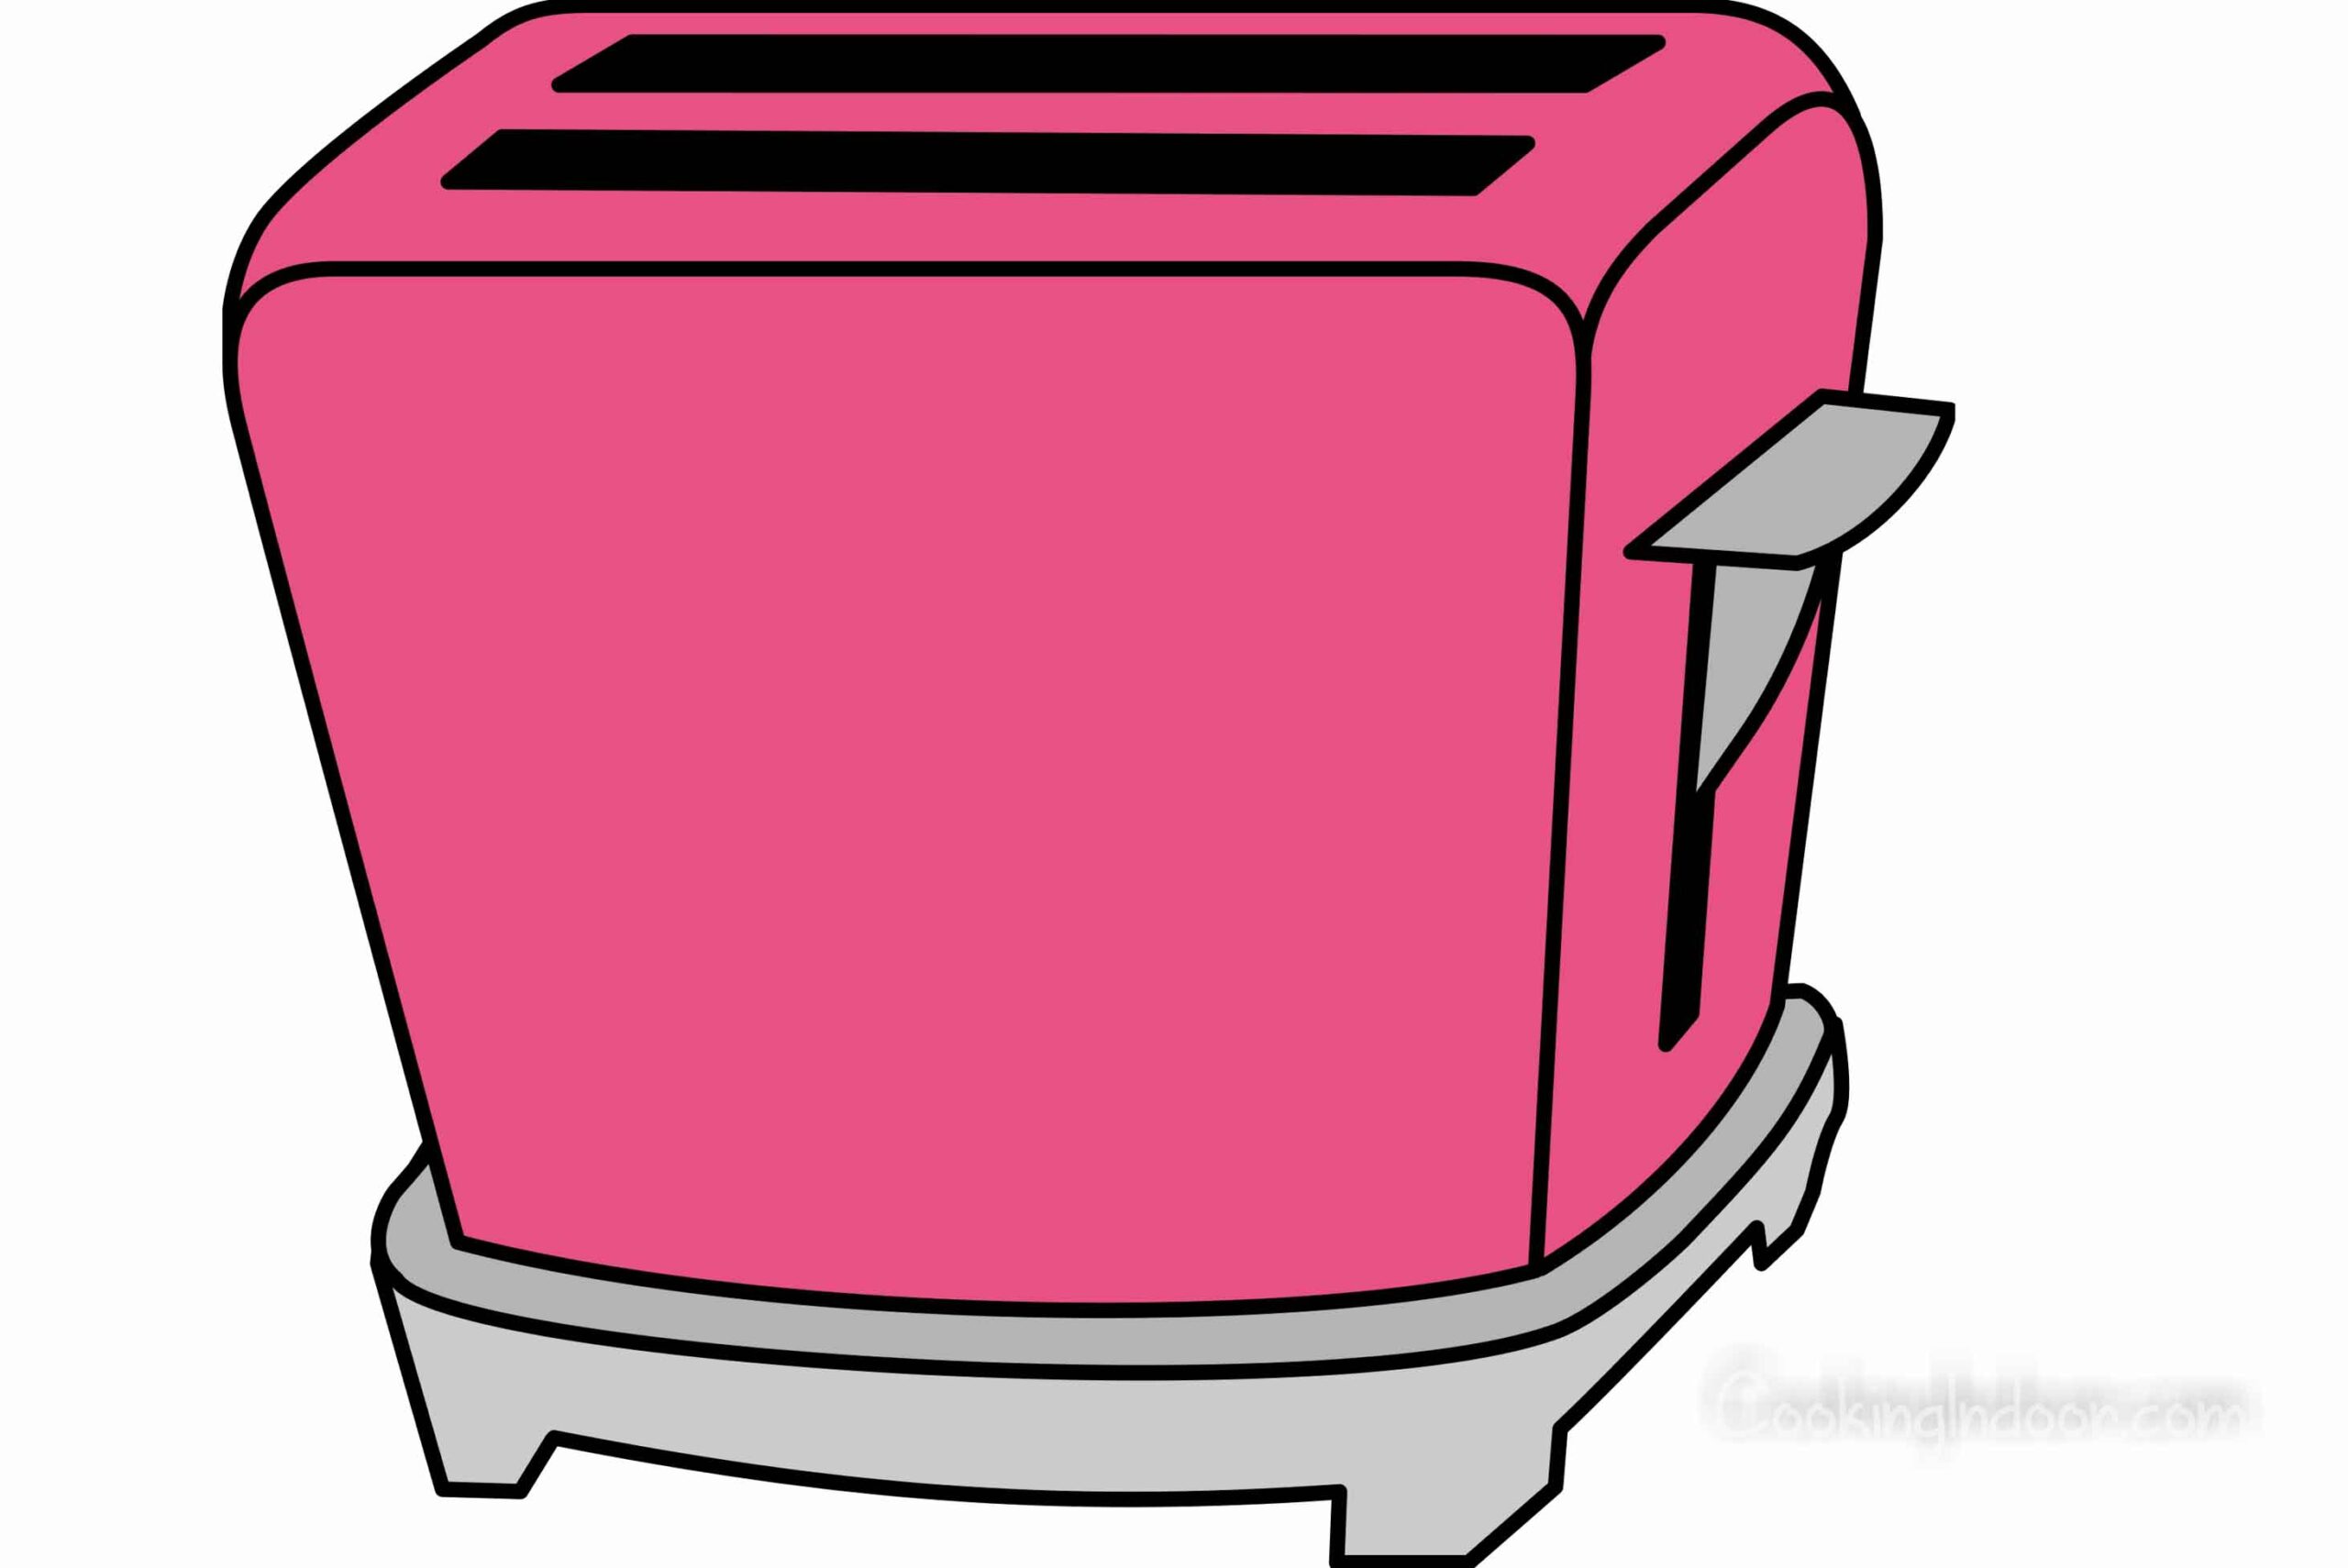 Toaster definition